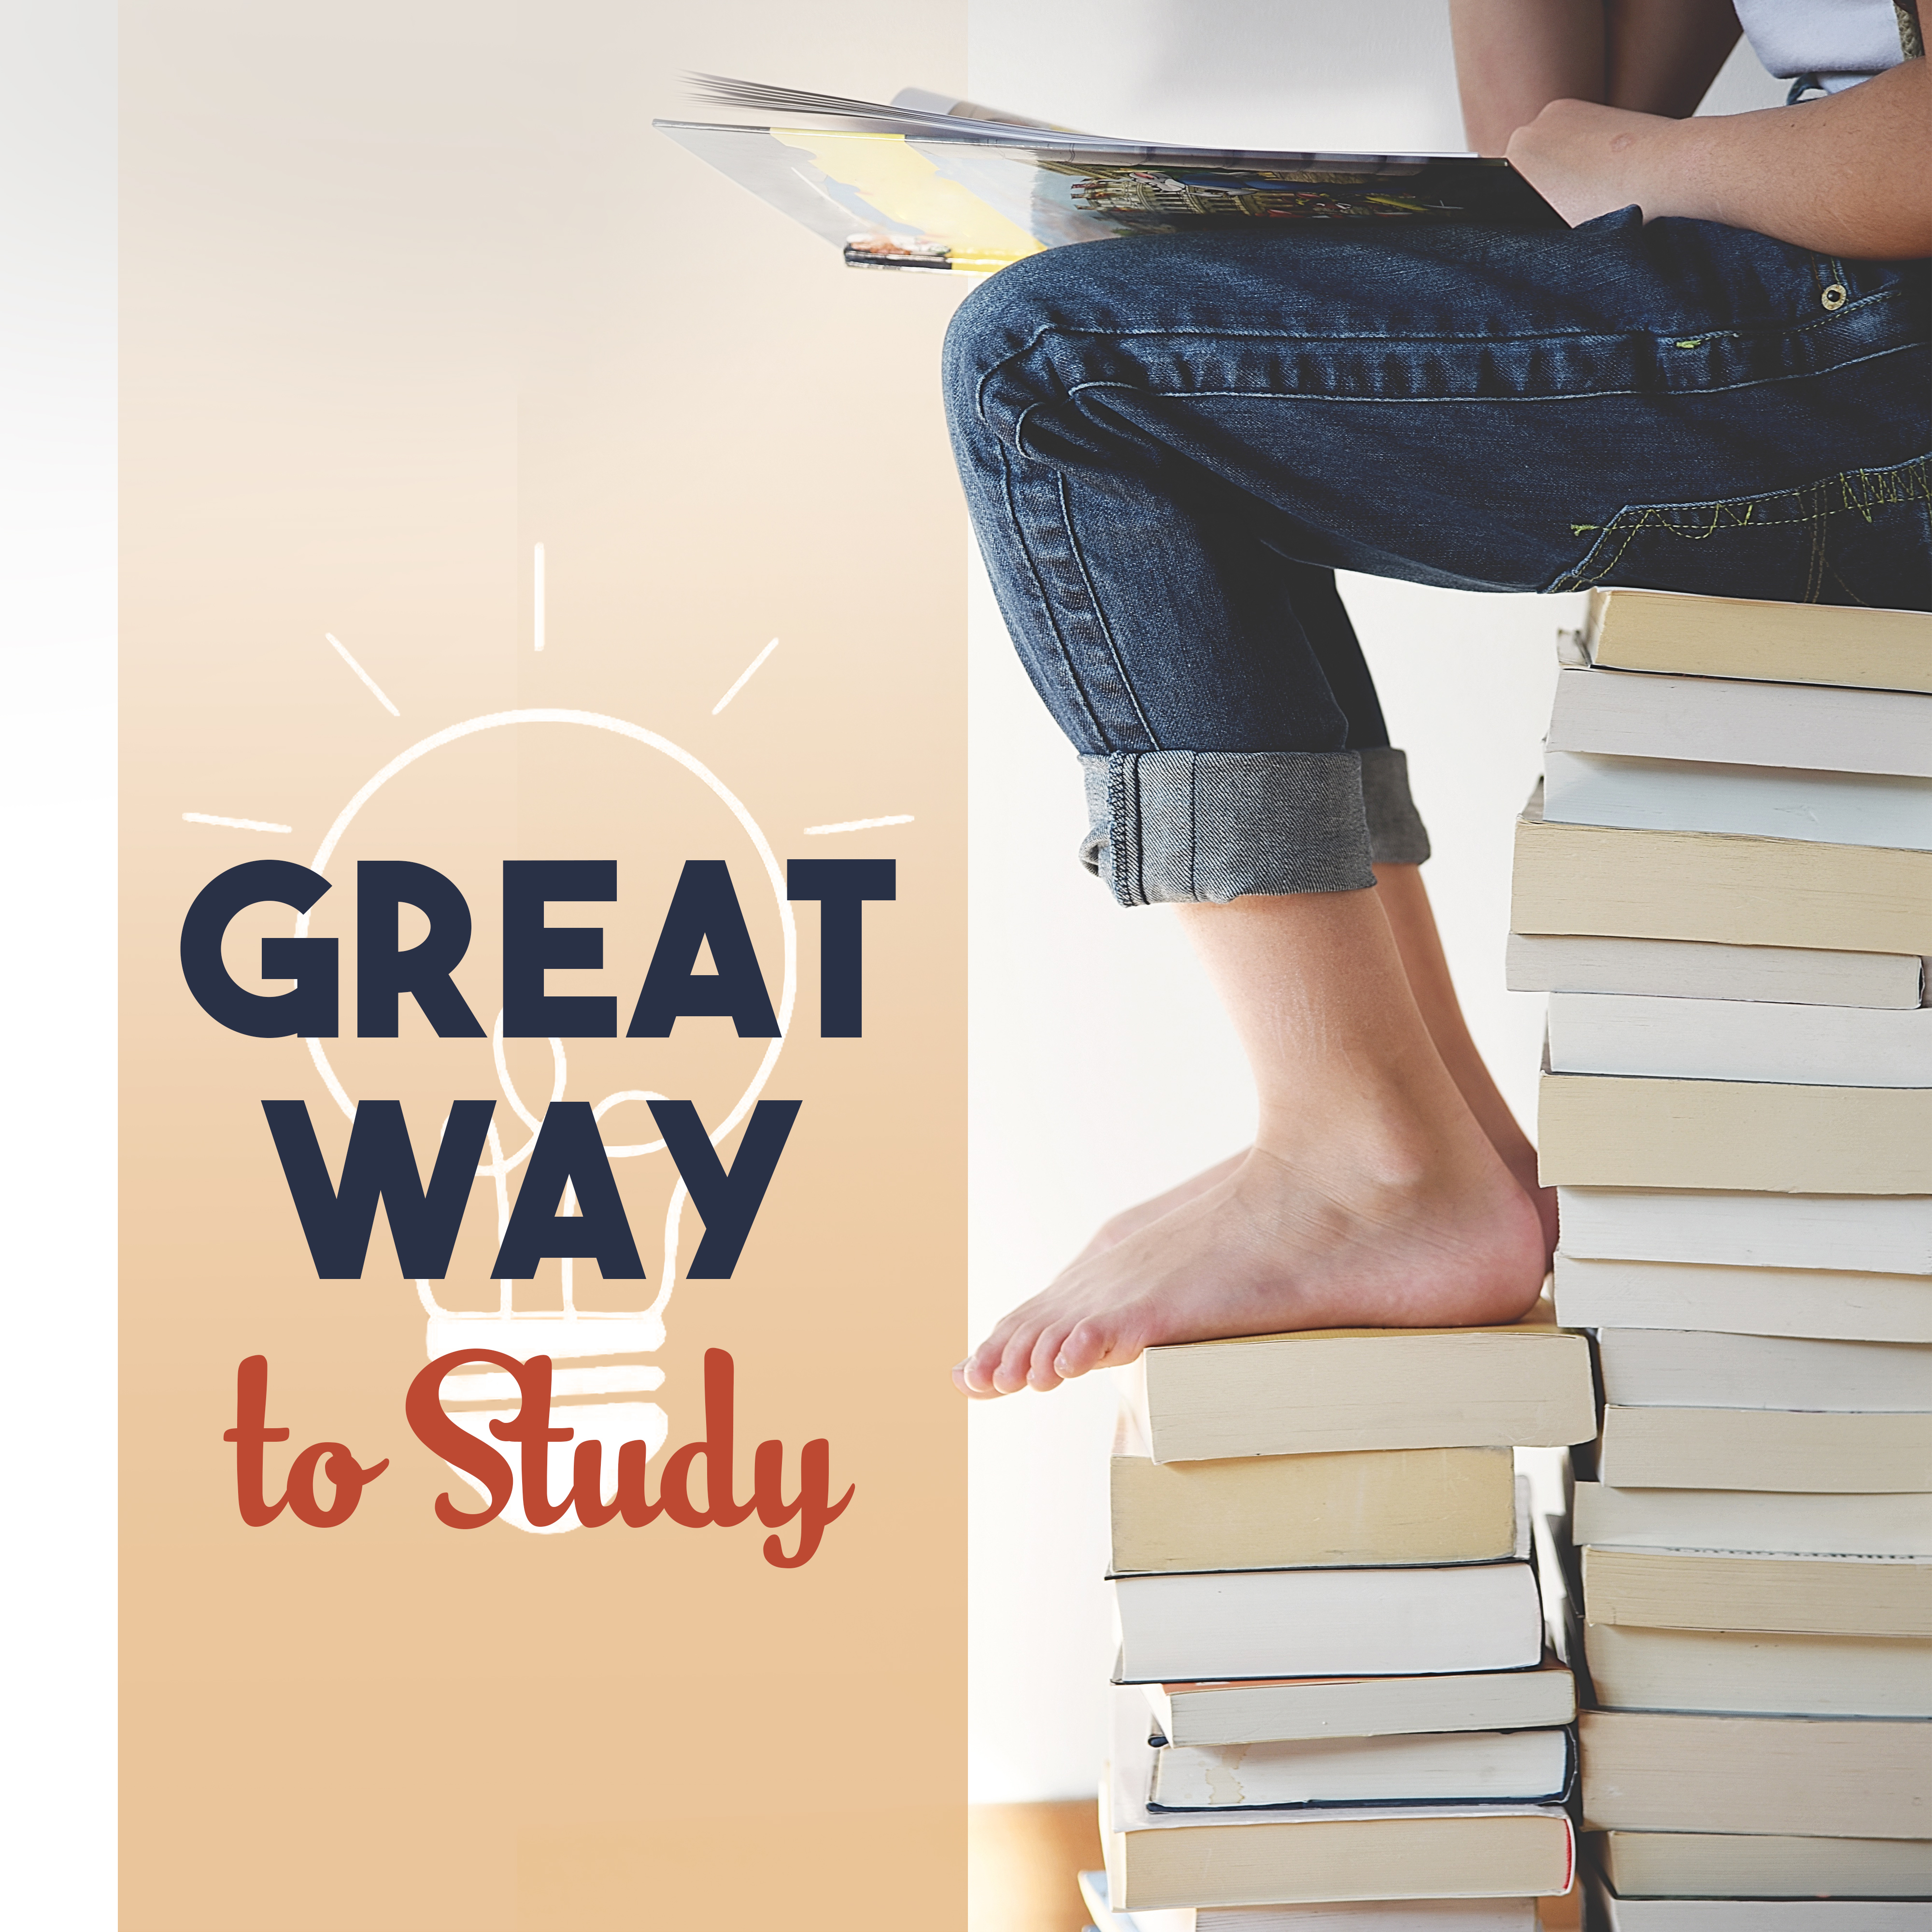 Great Way to Study – Soft Music, Classics Sounds to Study, Focus on Task